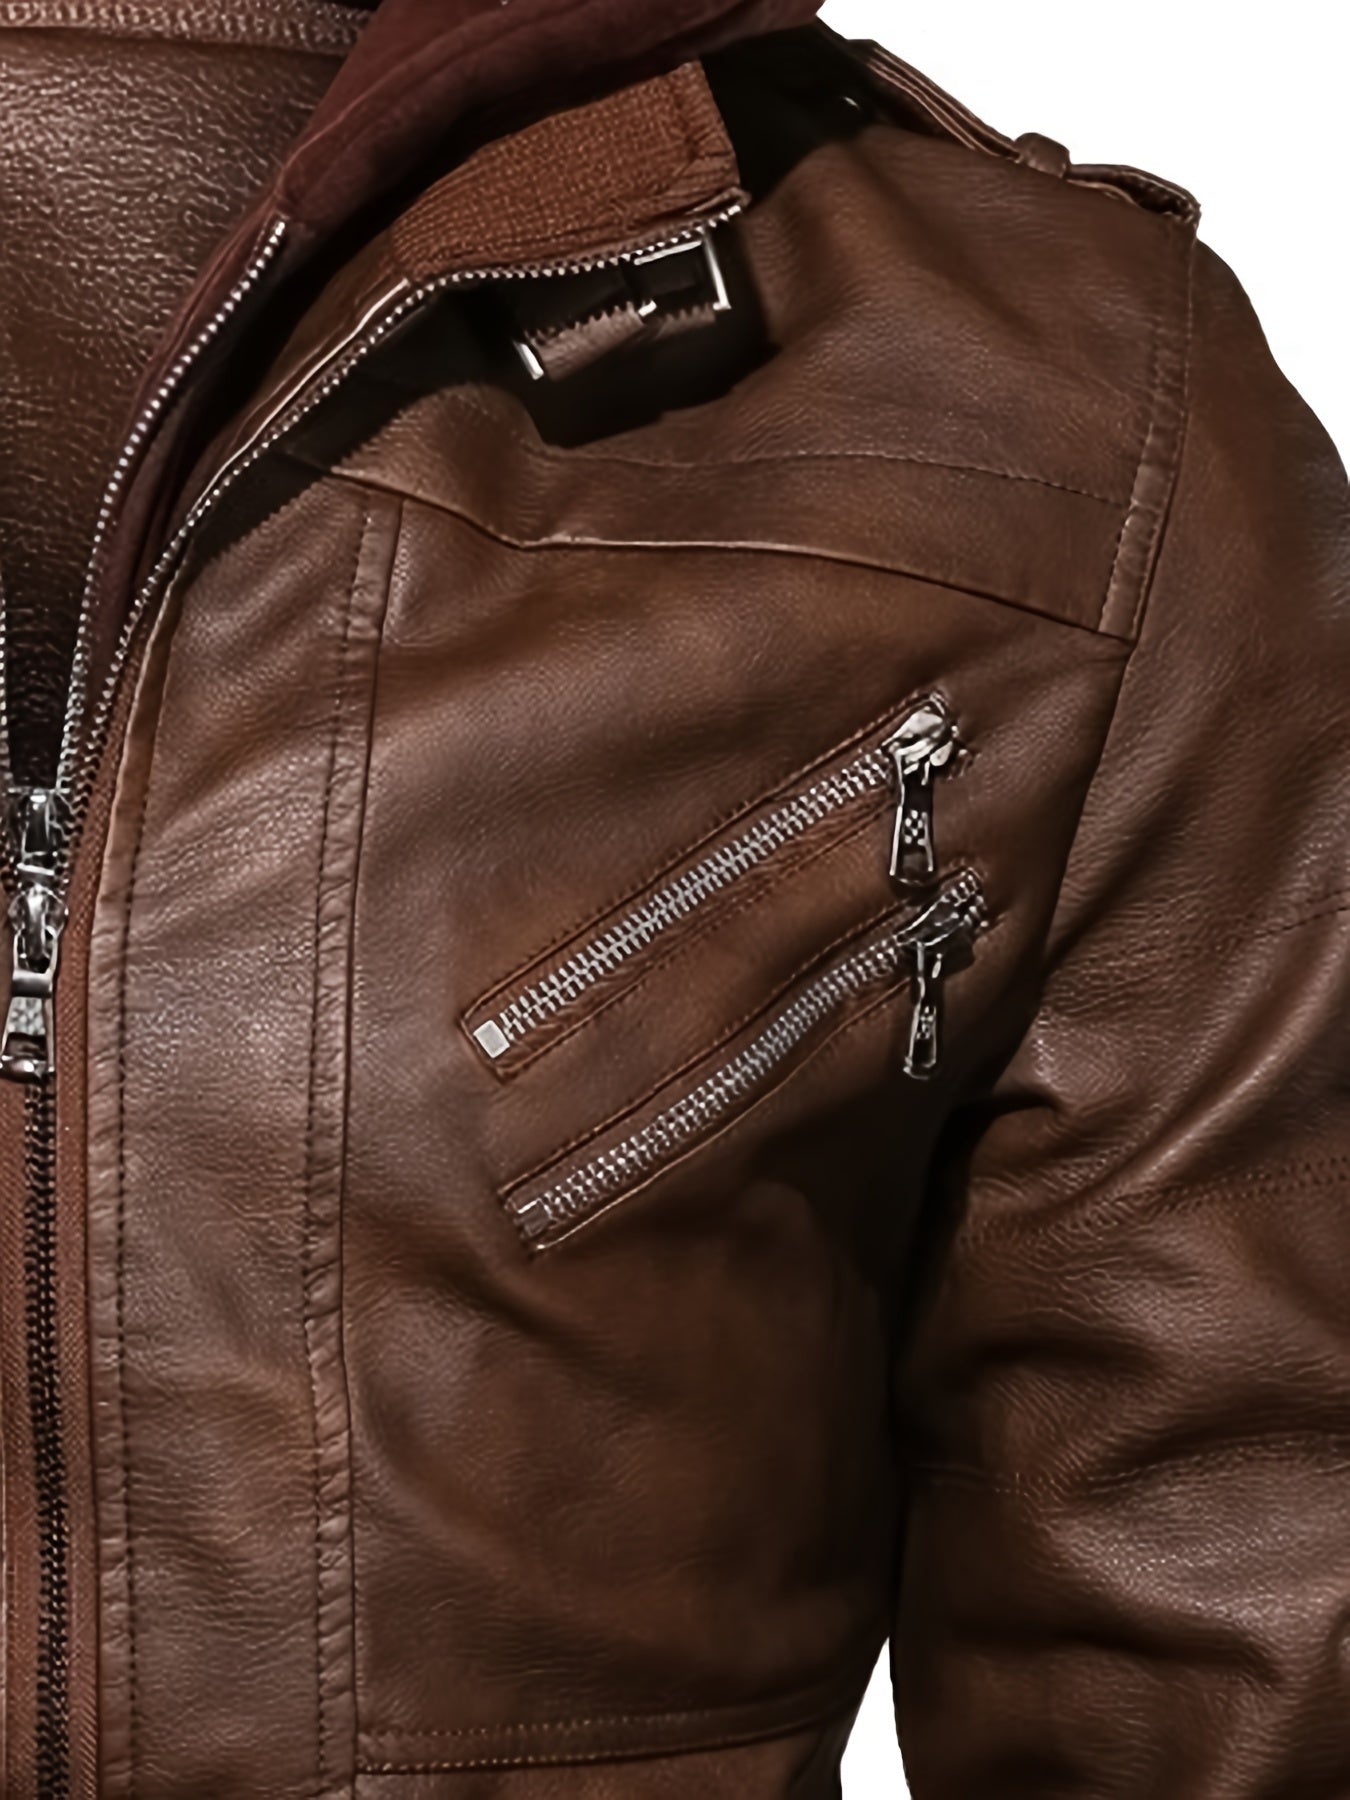 Ride with Confidence: Maplesteed Motorcycle Leather Jackets - CasualFlowshop